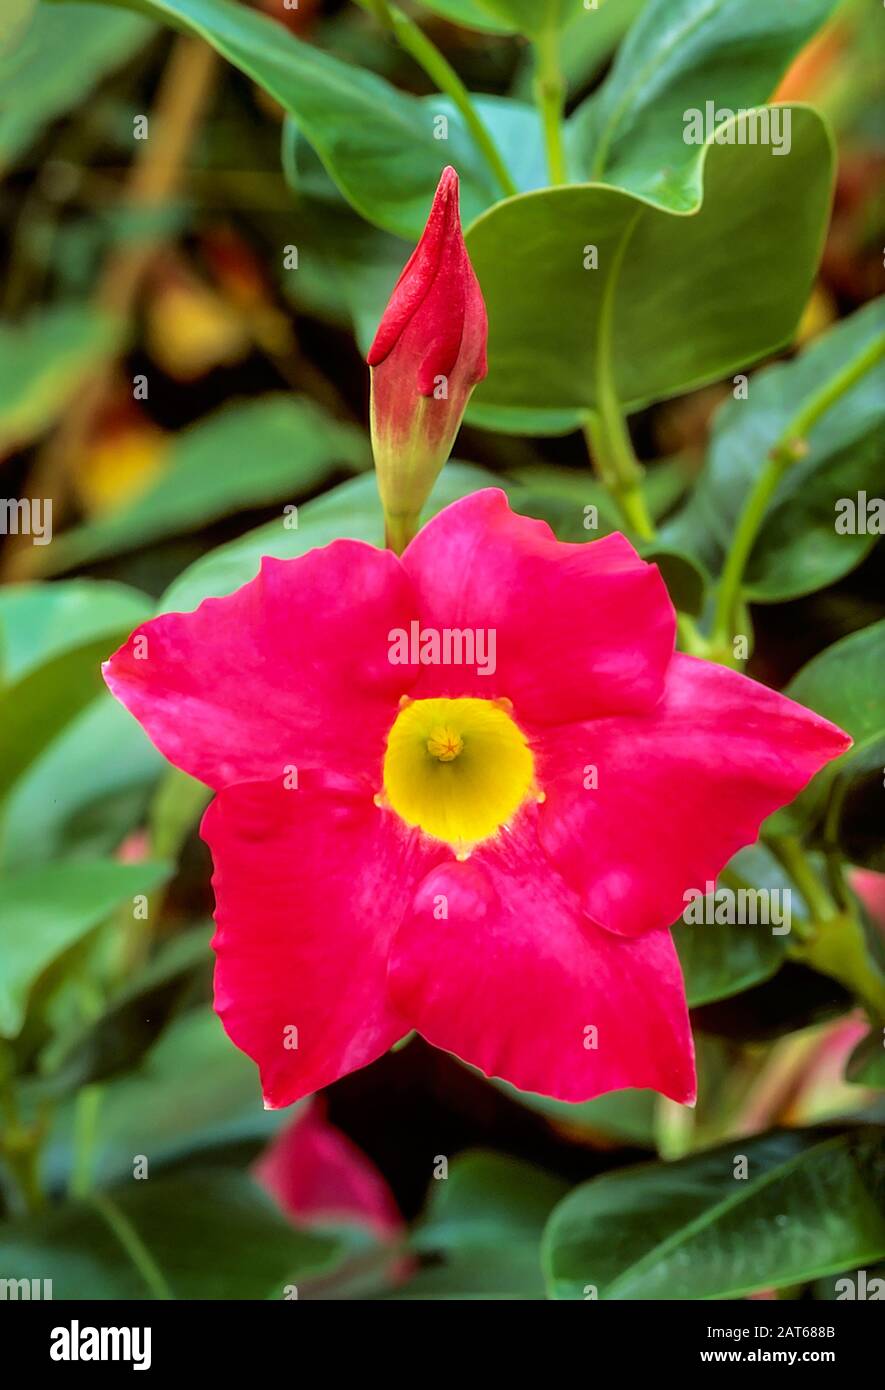 Mandevilla splendens or Dipladenia splendens showing flower and bud. An evergreen climber that has rose pink flowers in summer and is frost tender. Stock Photo